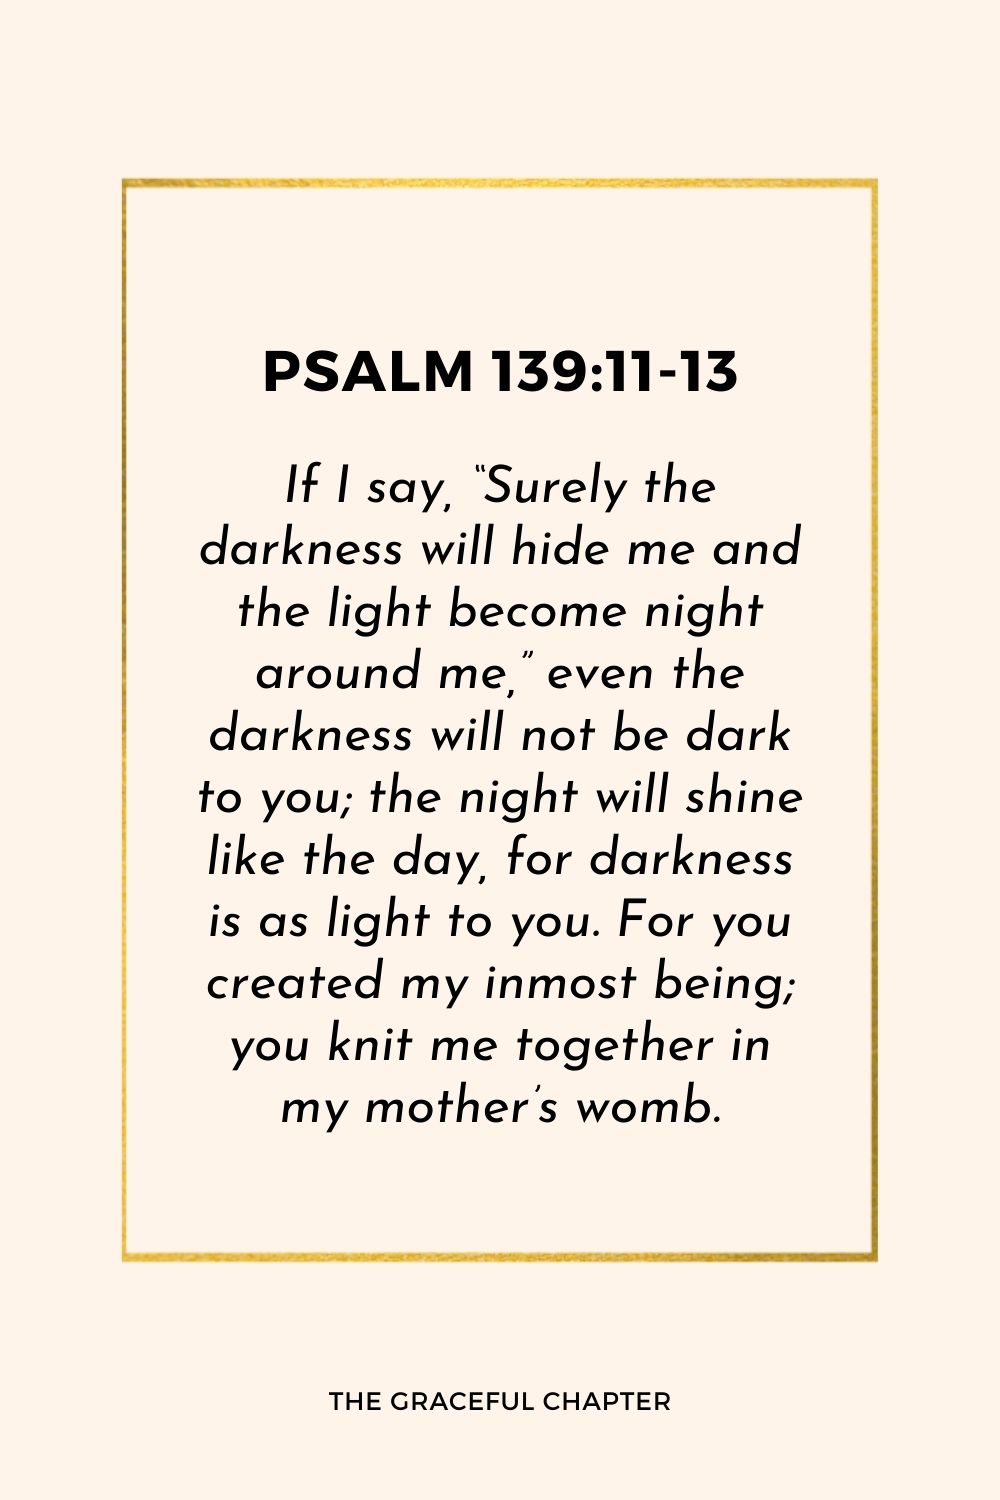 If I say, “Surely the darkness will hide me and the light become night around me,” even the darkness will not be dark to you; the night will shine like the day, for darkness is as light to you. For you created my inmost being; you knit me together in my mother’s womb.